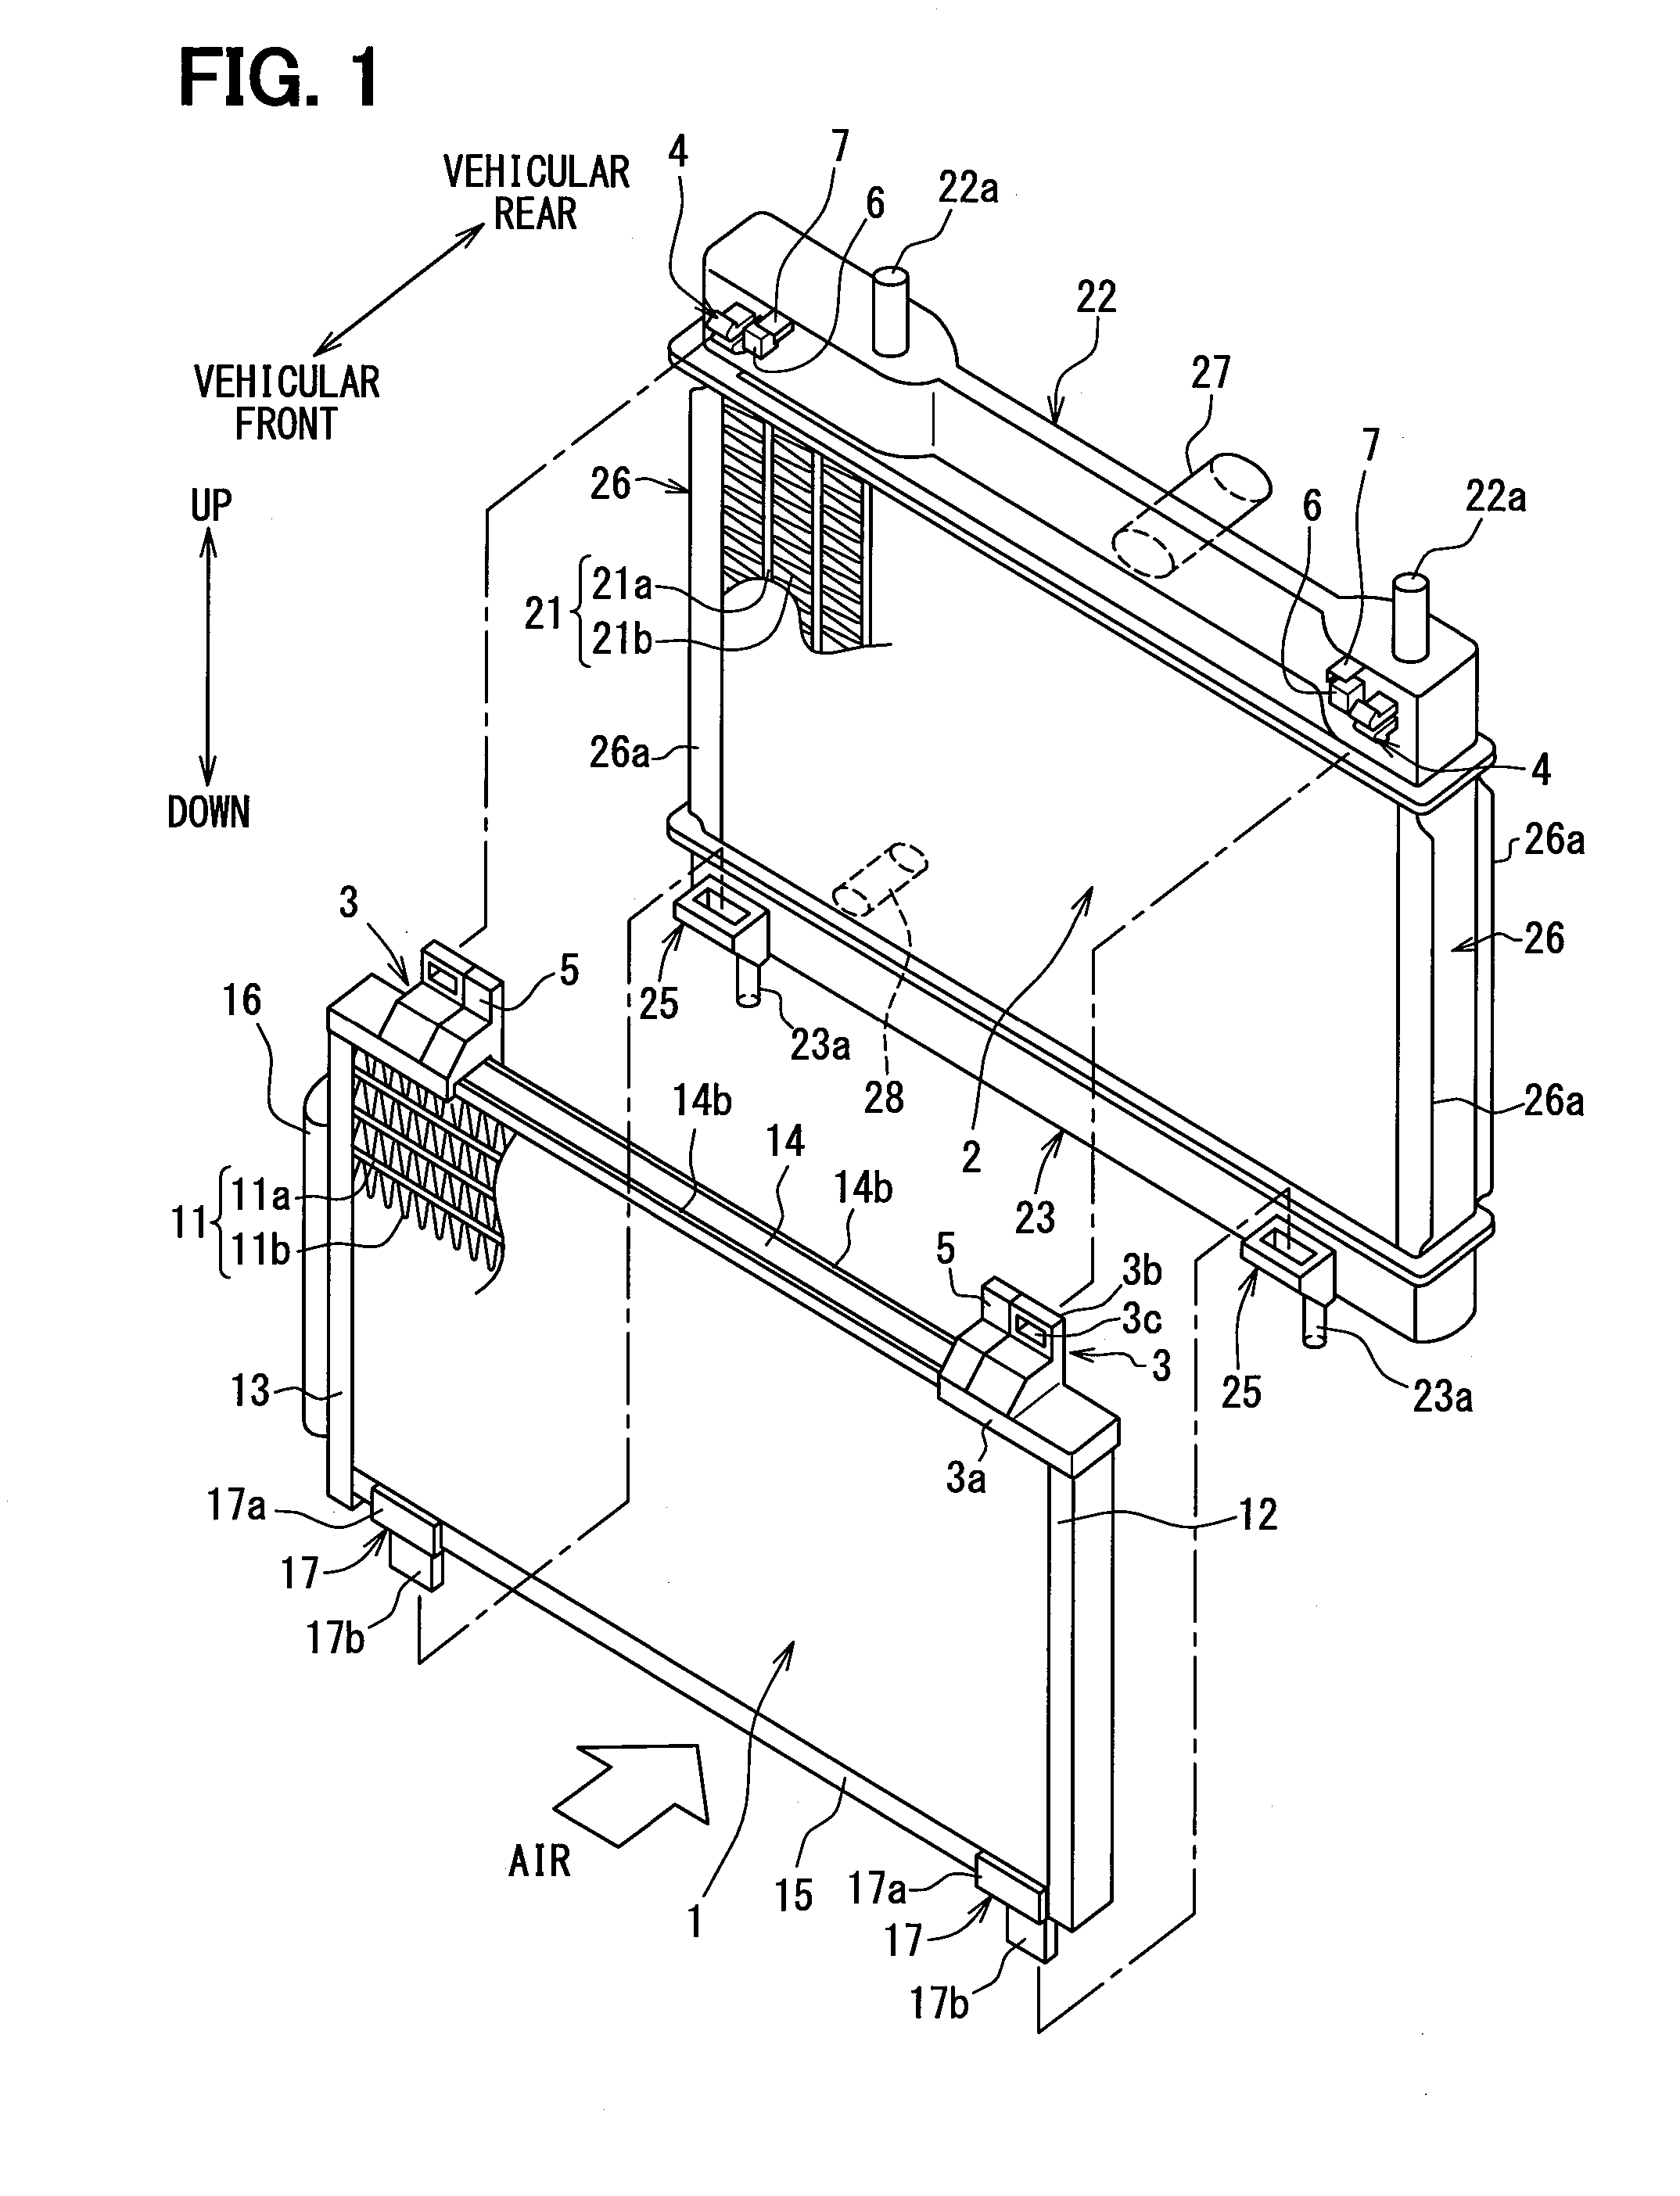 Heat exchanger mounting structure